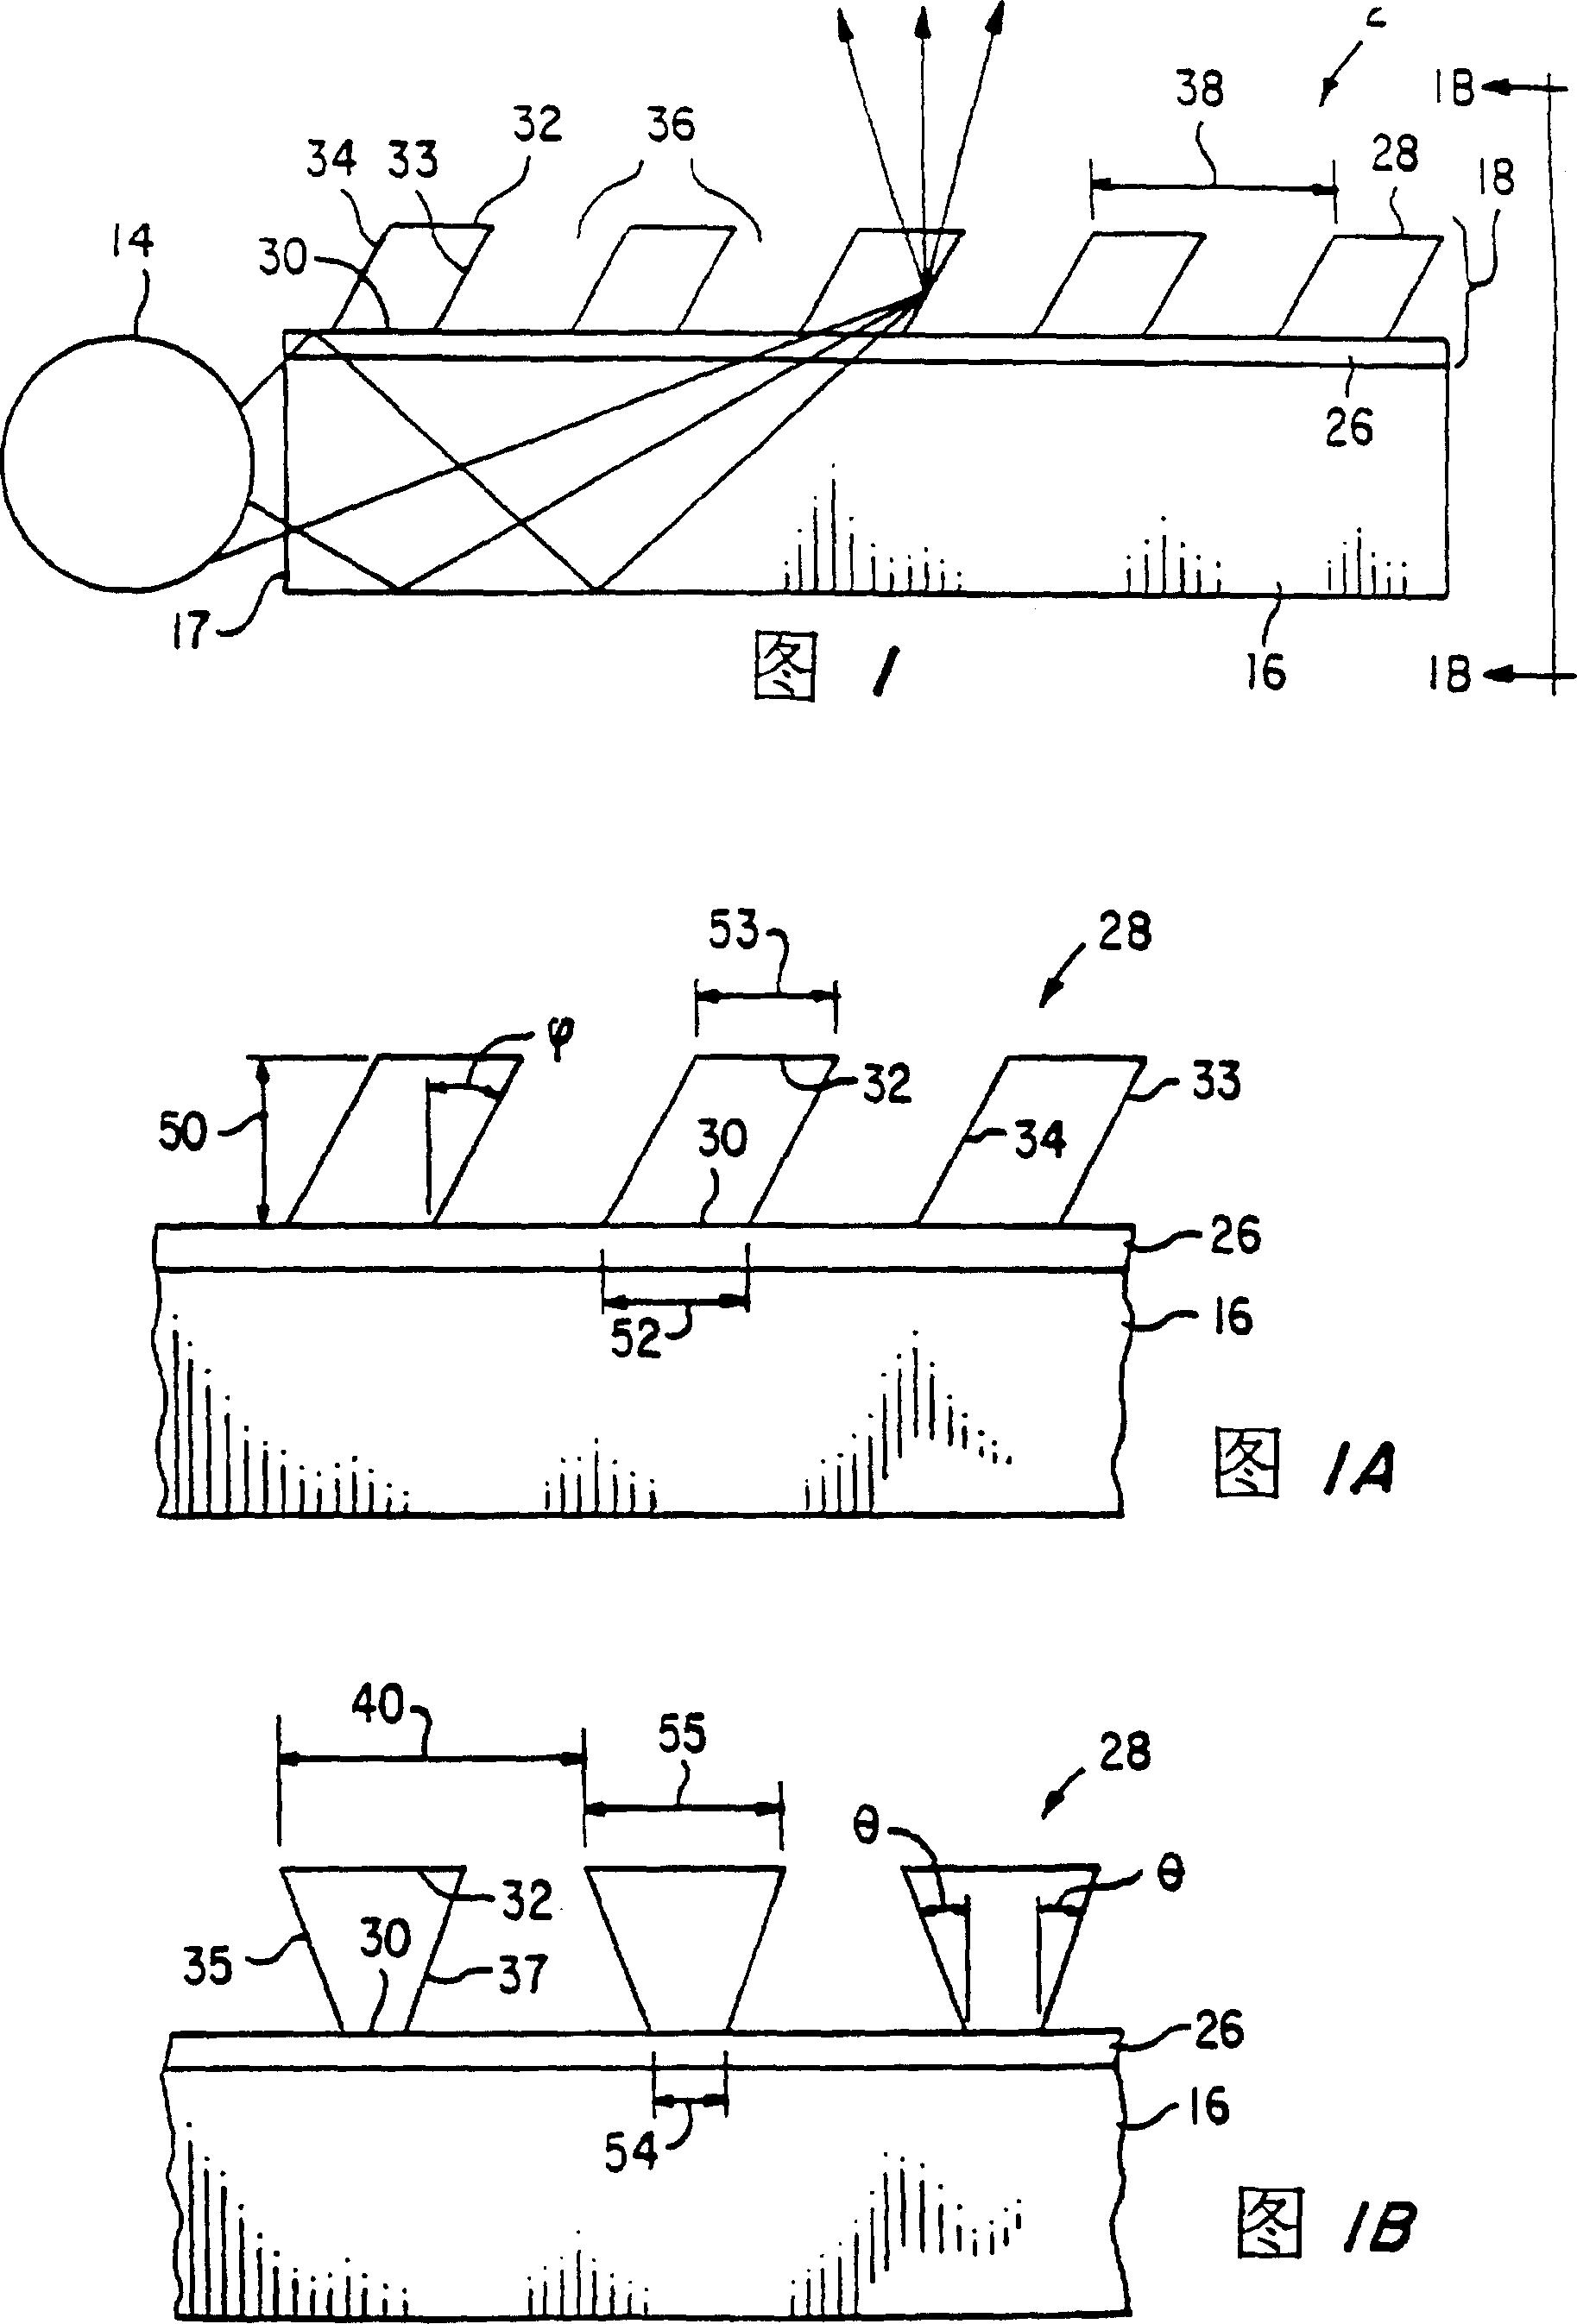 Illumination system employing array of microprisms